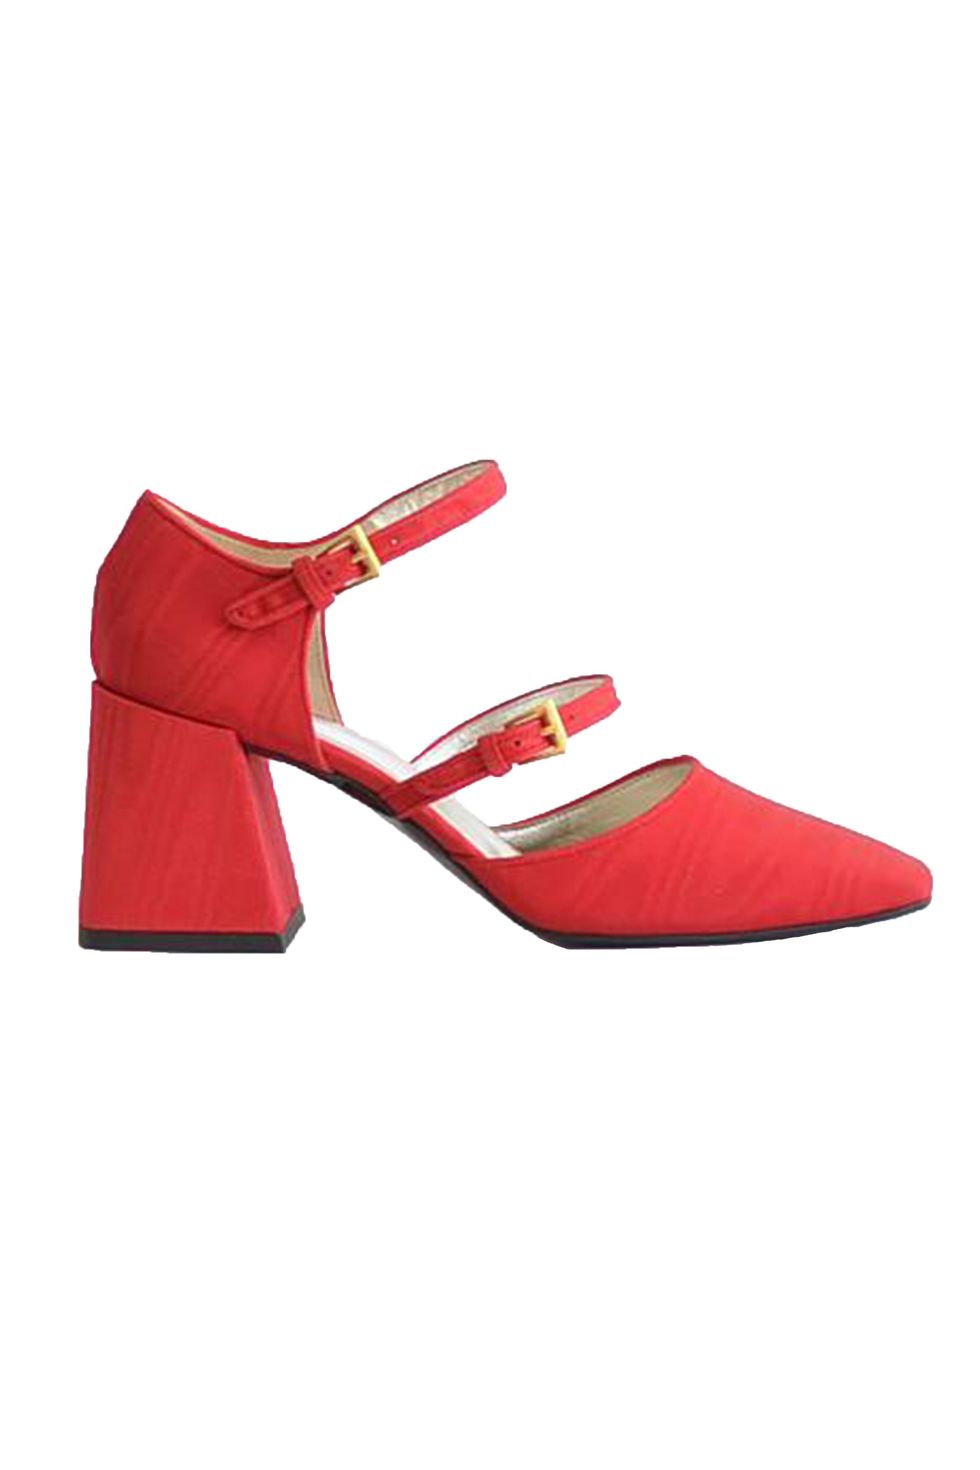 Suzanne Rae Double Strap Mary Jane - Red